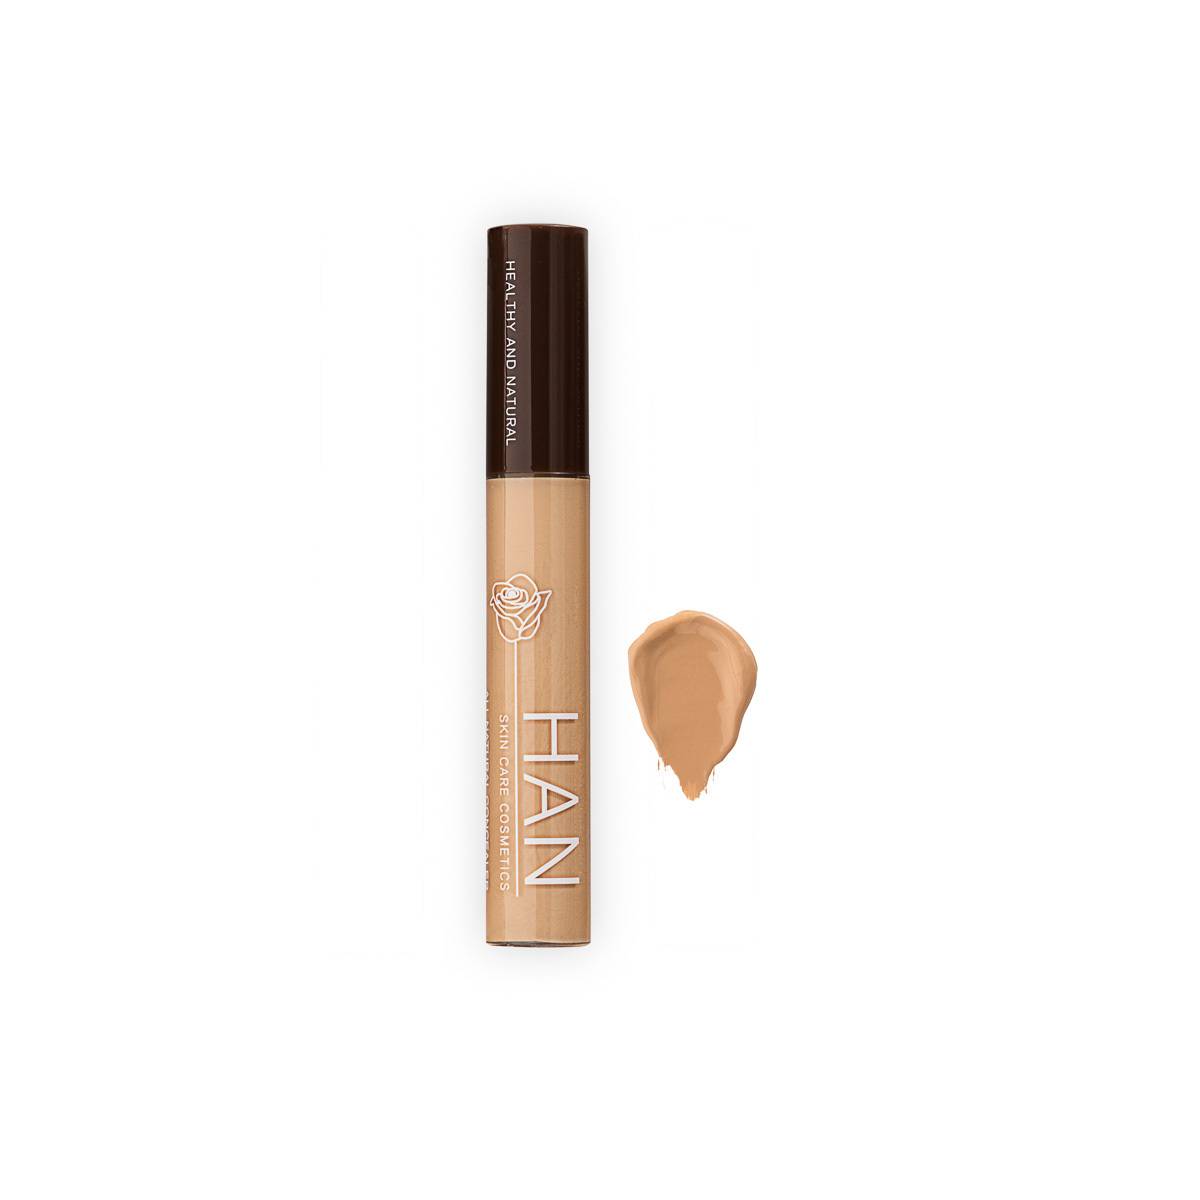 A stick of HAN concealer and a smudge of concealer next to the stick.